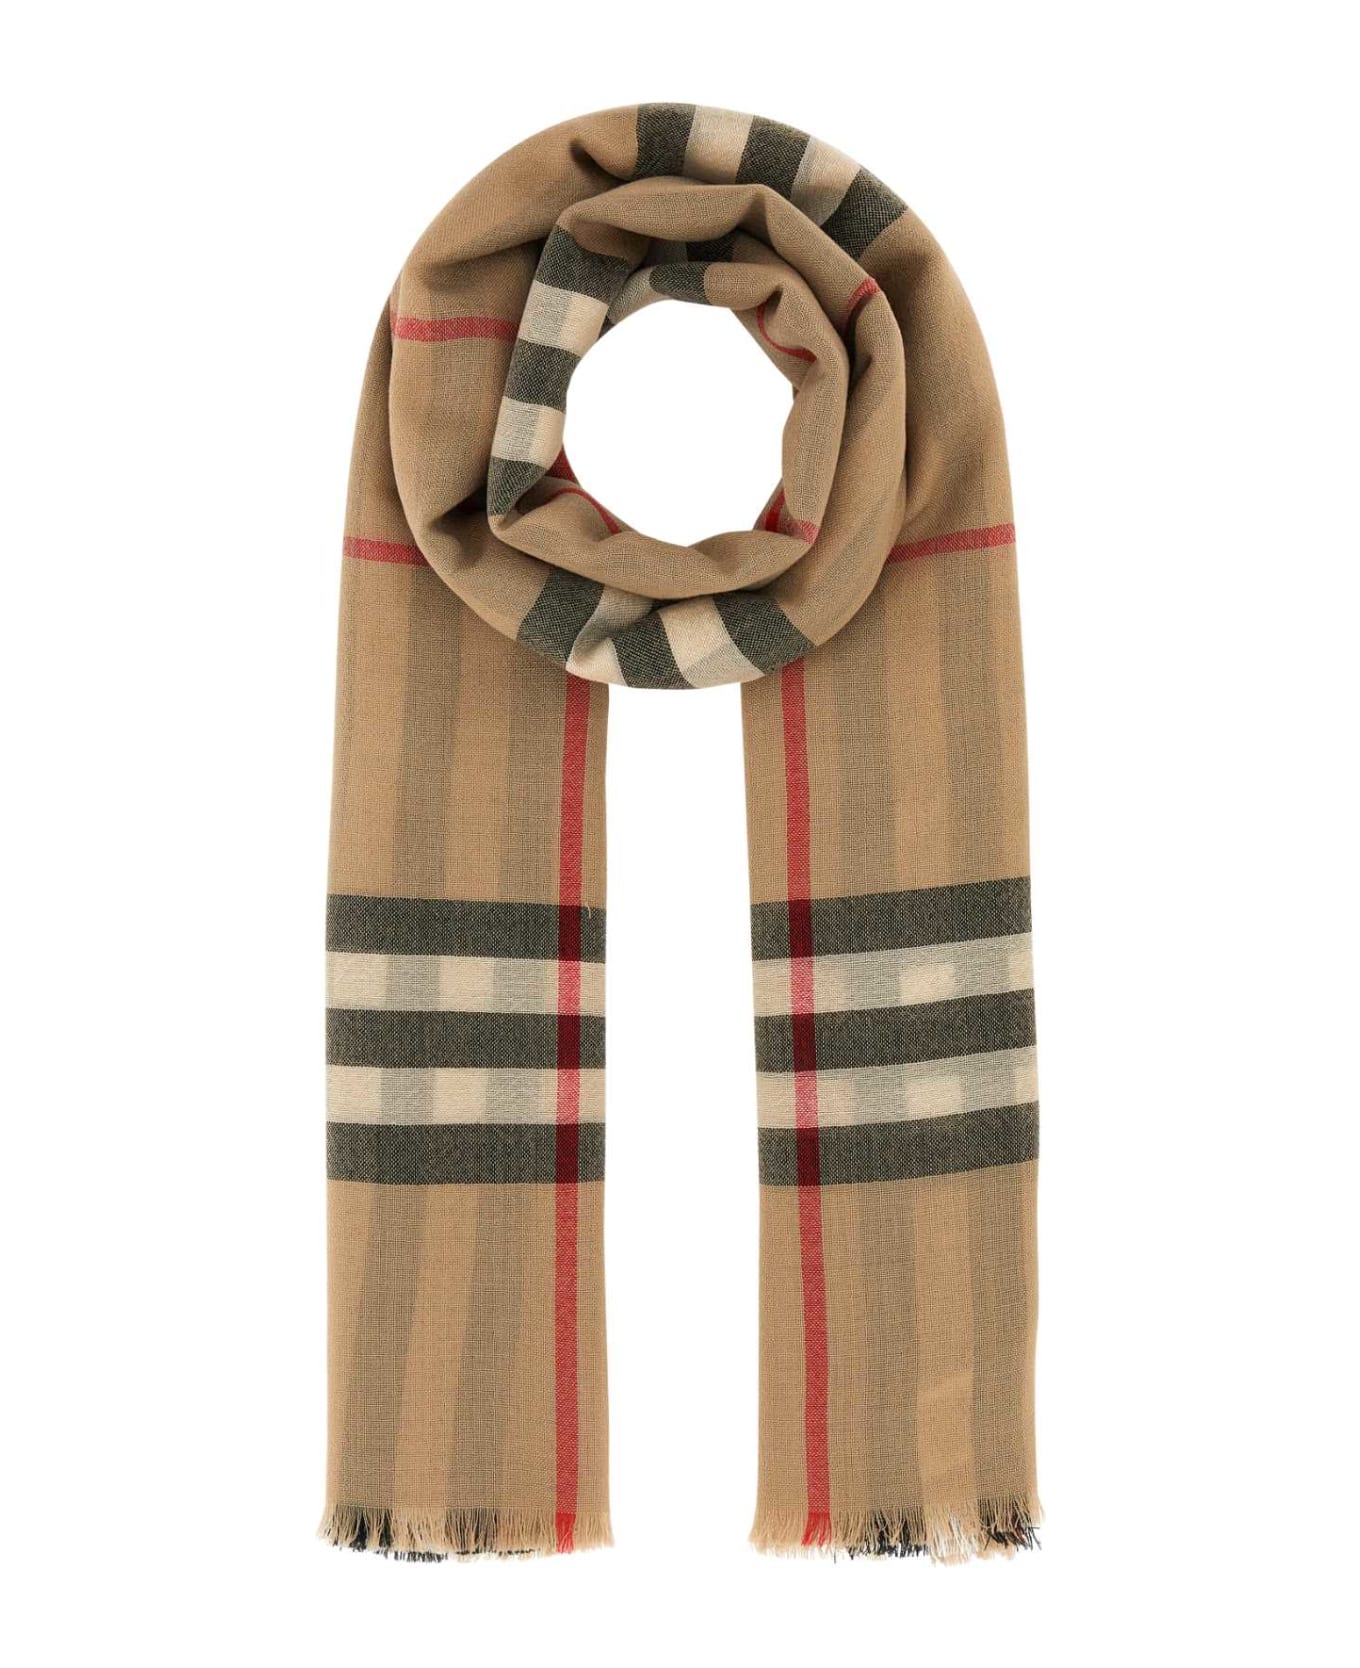 Burberry Embroidered Wool Scarf - ARCHIVEBEIGE スカーフ